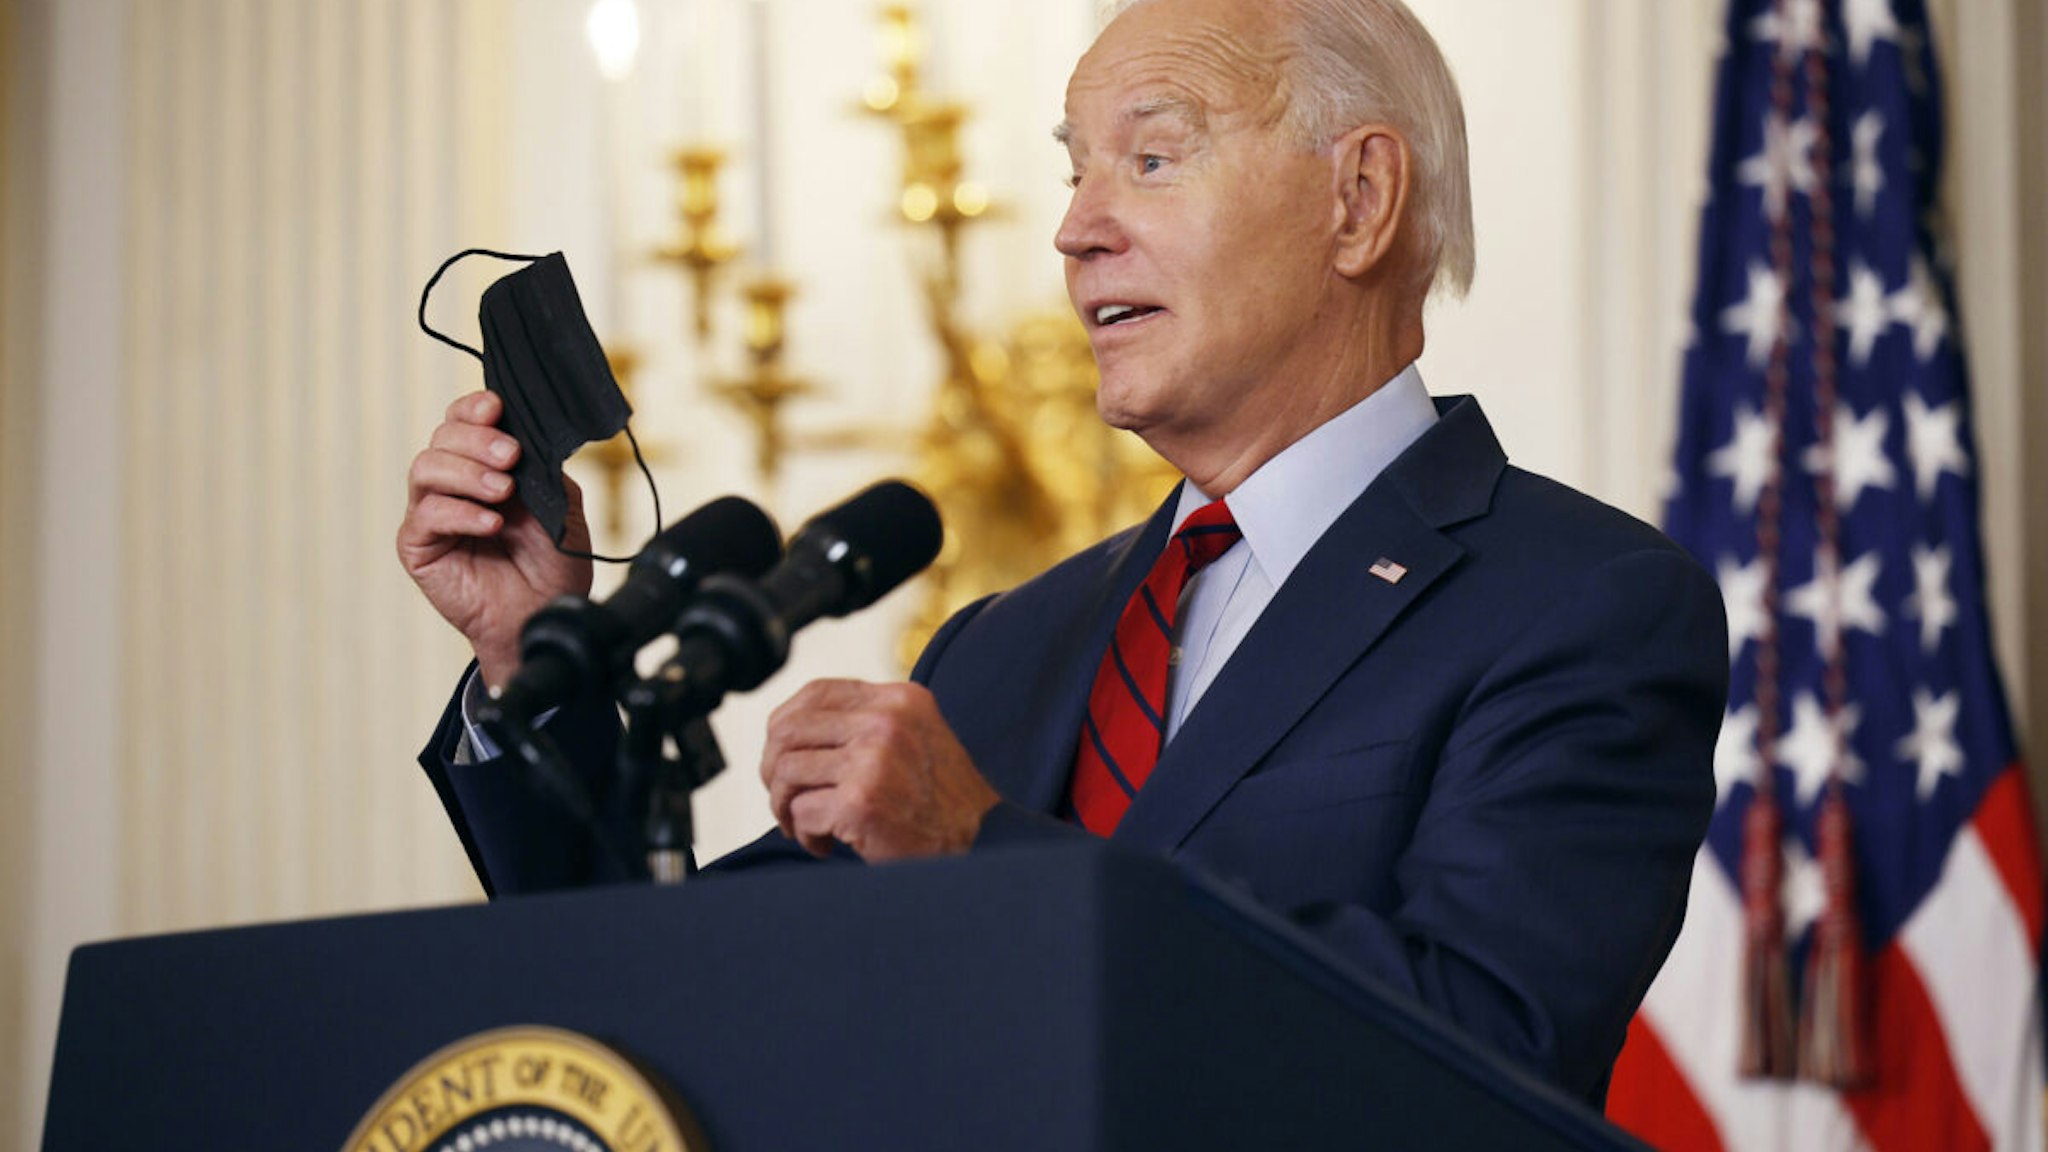 U.S. President Joe Biden holds up his mask while delivering remarks to an audience of leaders from the International Longshore and Warehouse Union (ILWU) and the Pacific Maritime Association (PMA) during an event to congratulate them on finalizing a new labor contract in the State Dining Room at the White House on September 06, 2023 in Washington, DC.